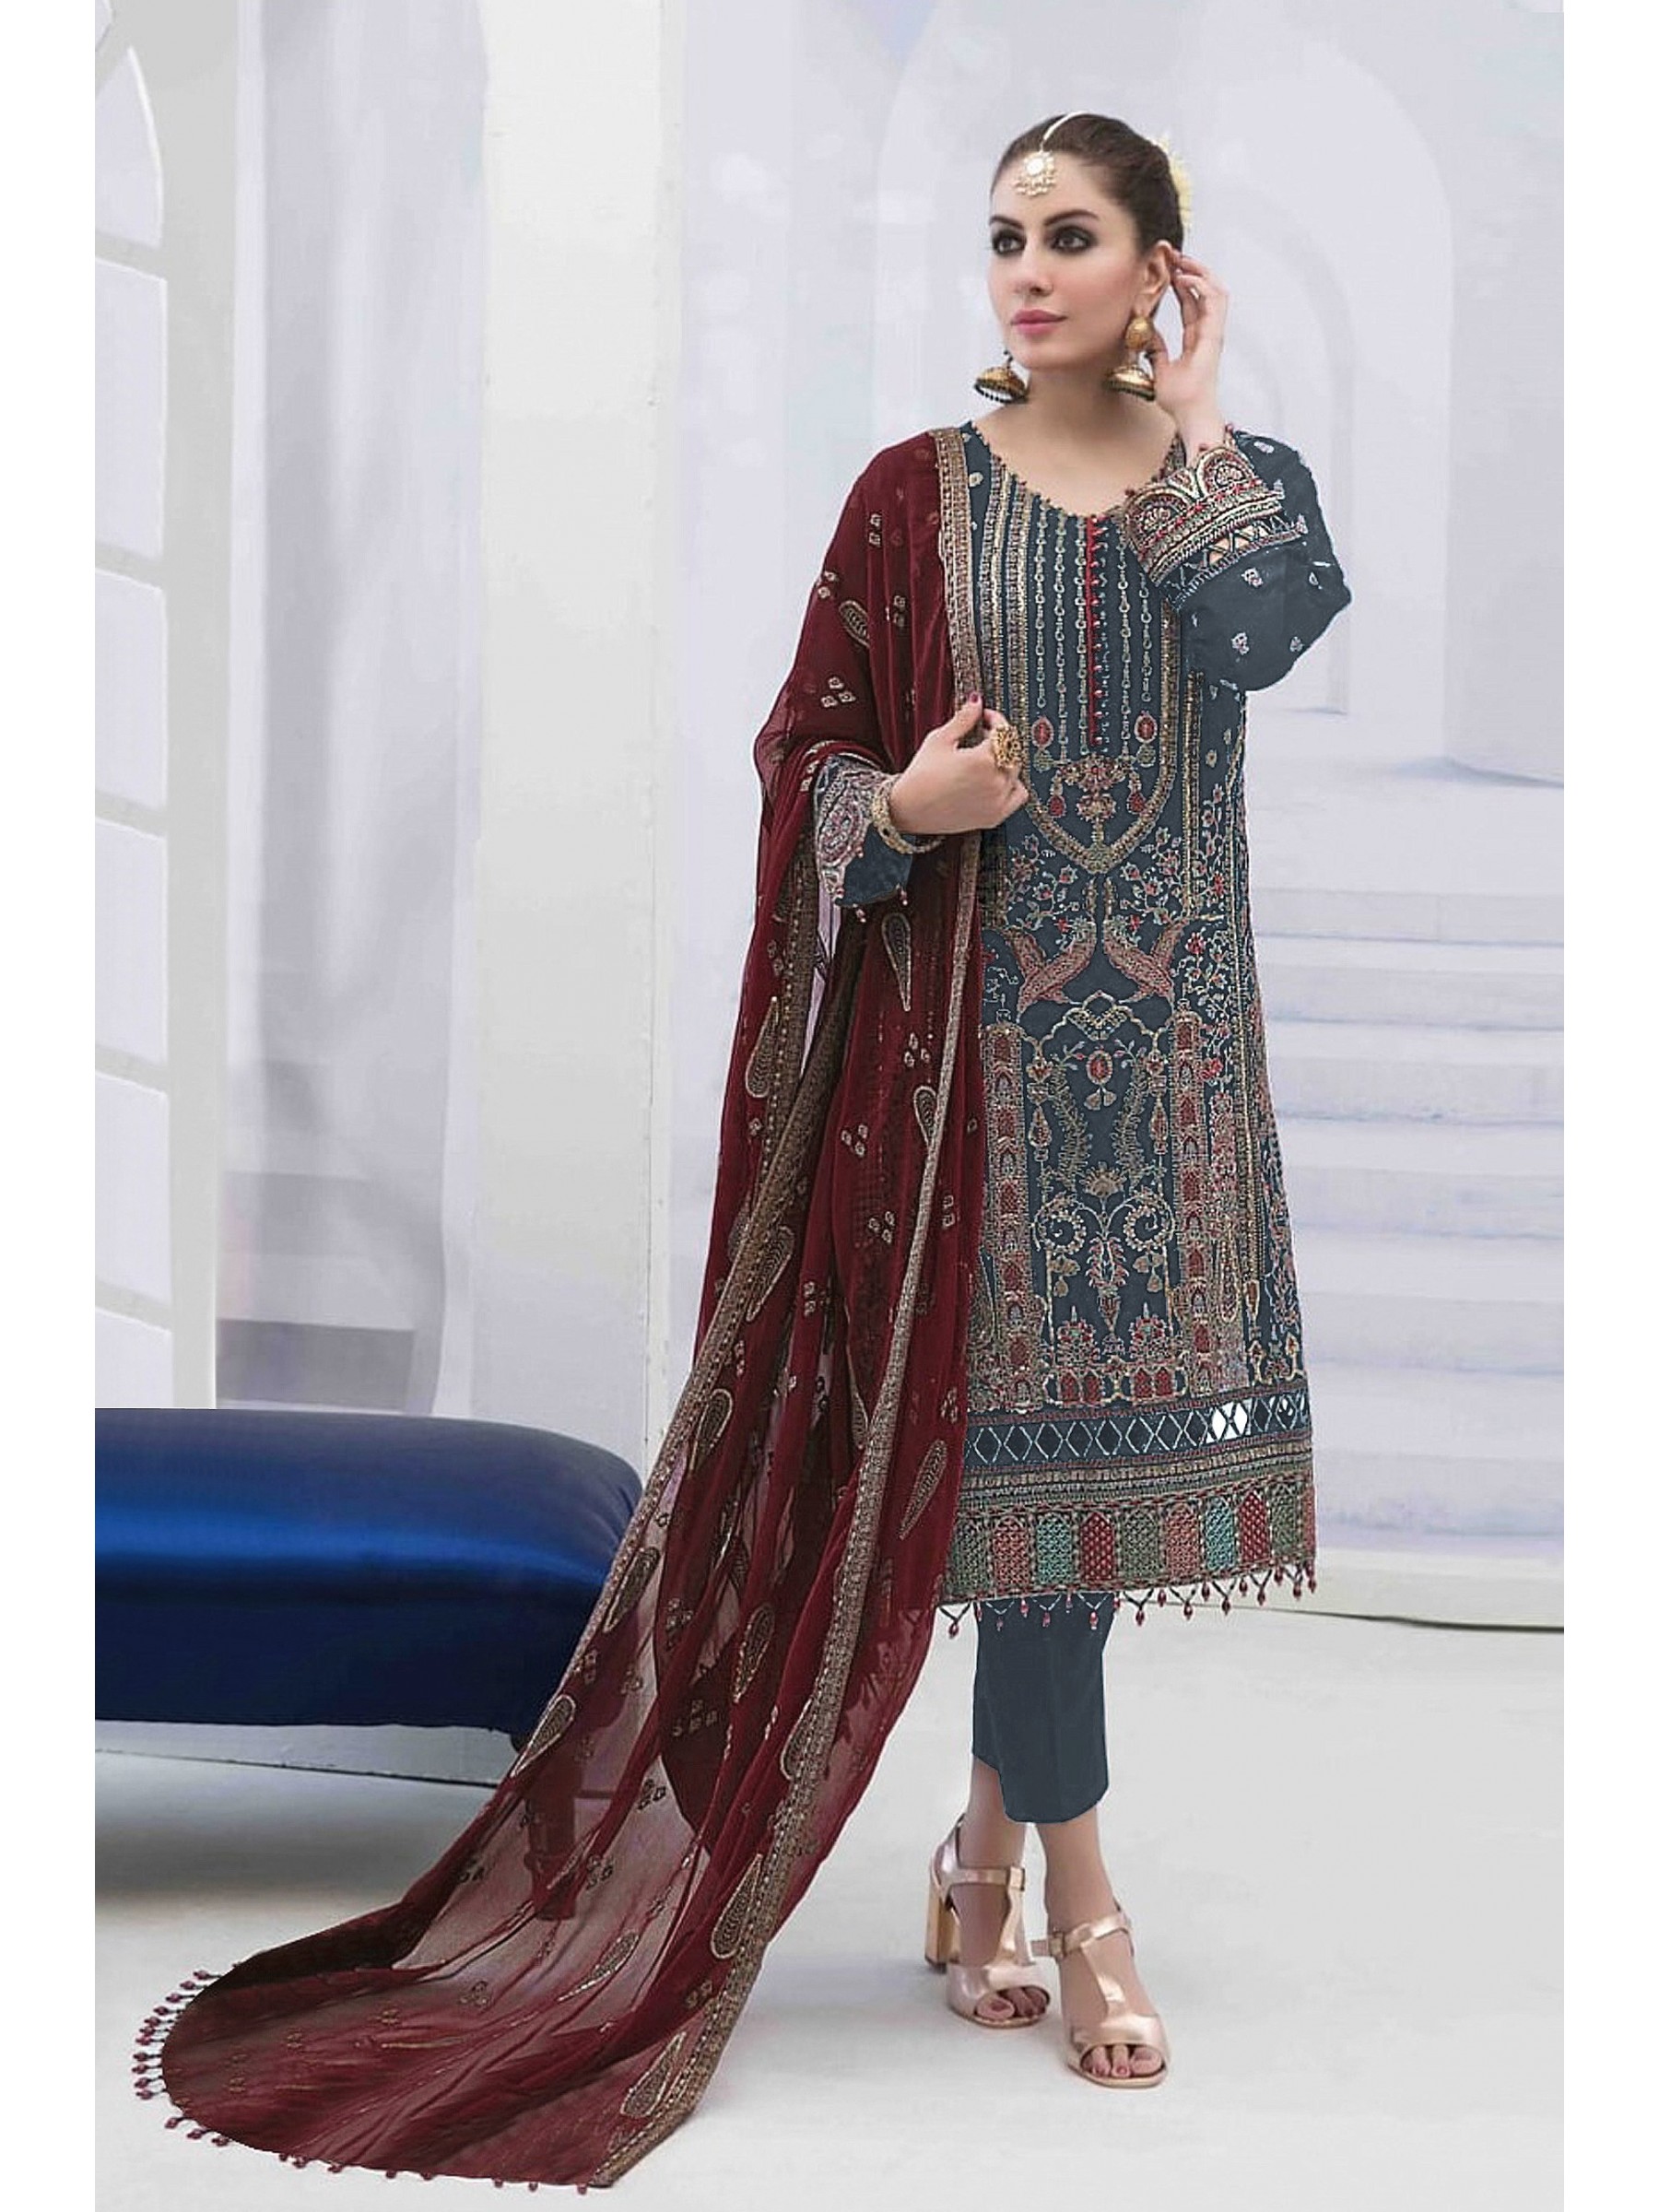 Georgette Silk Party Wear Suit in Grey Color with Embroidery Work